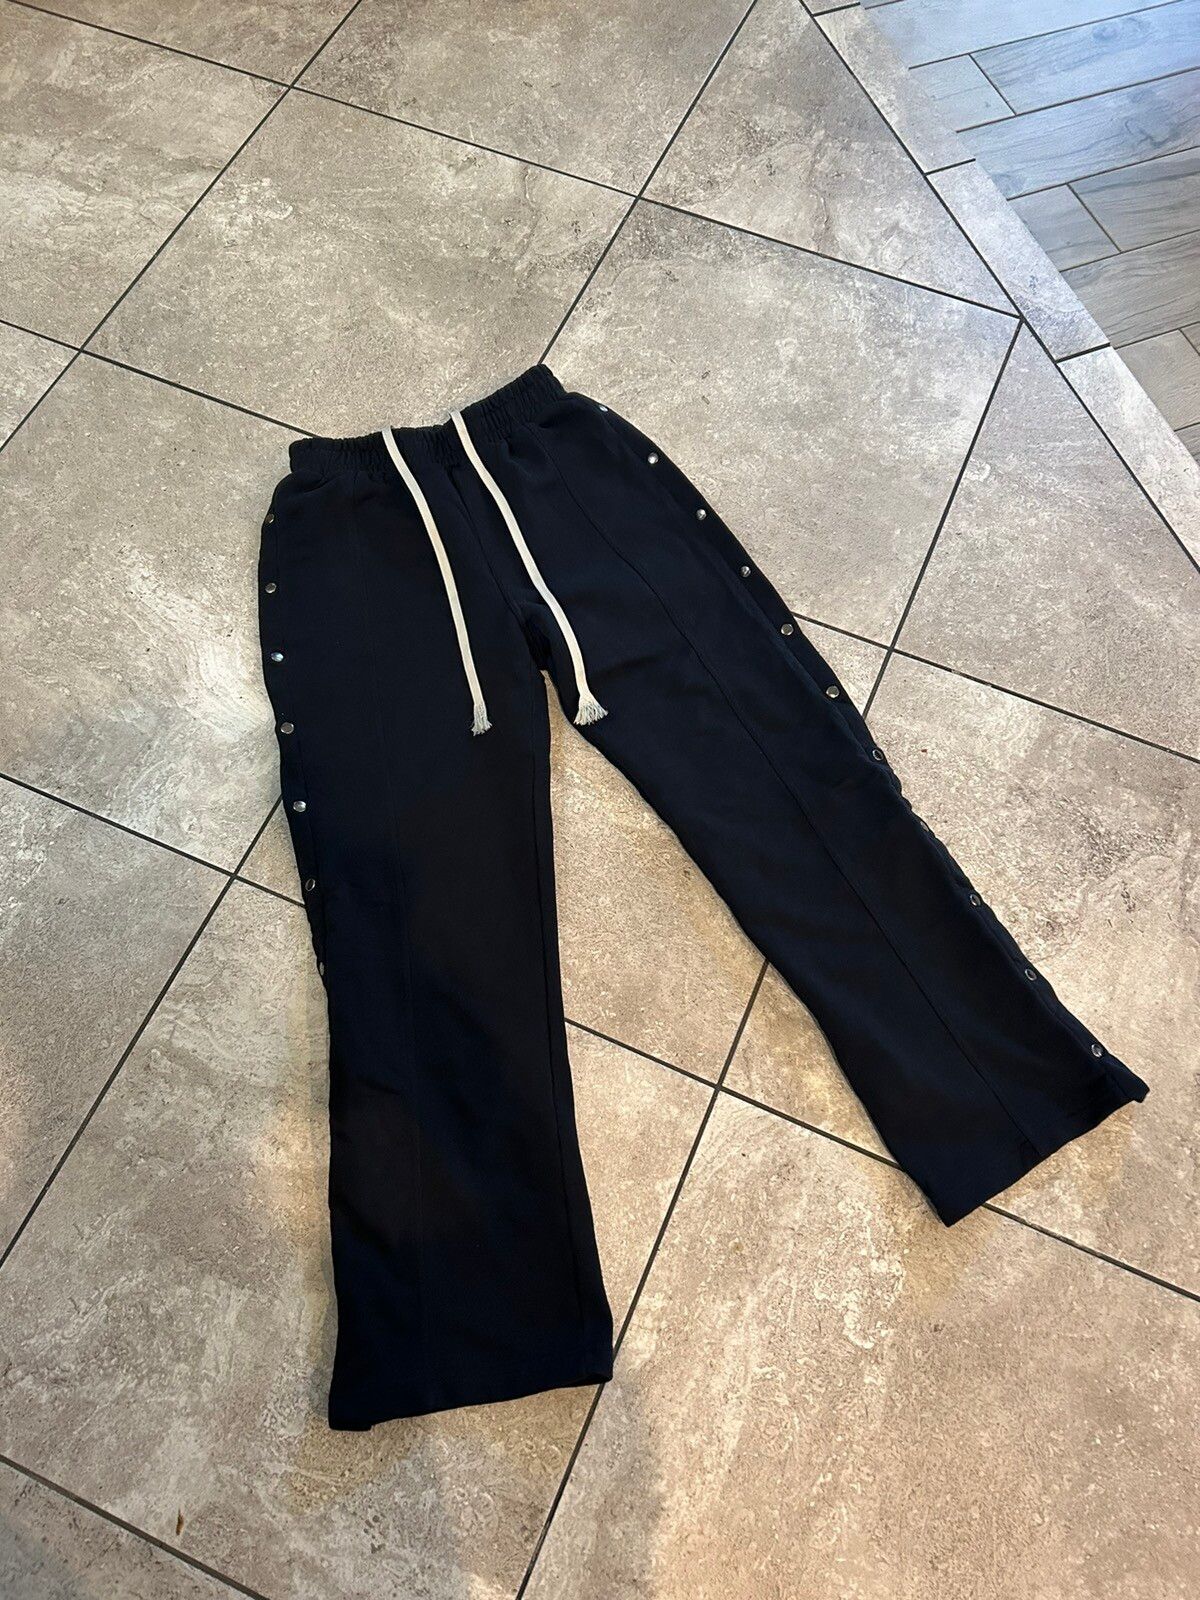 Vintage Rick Owens Pusher Pant Style Sweats | Grailed